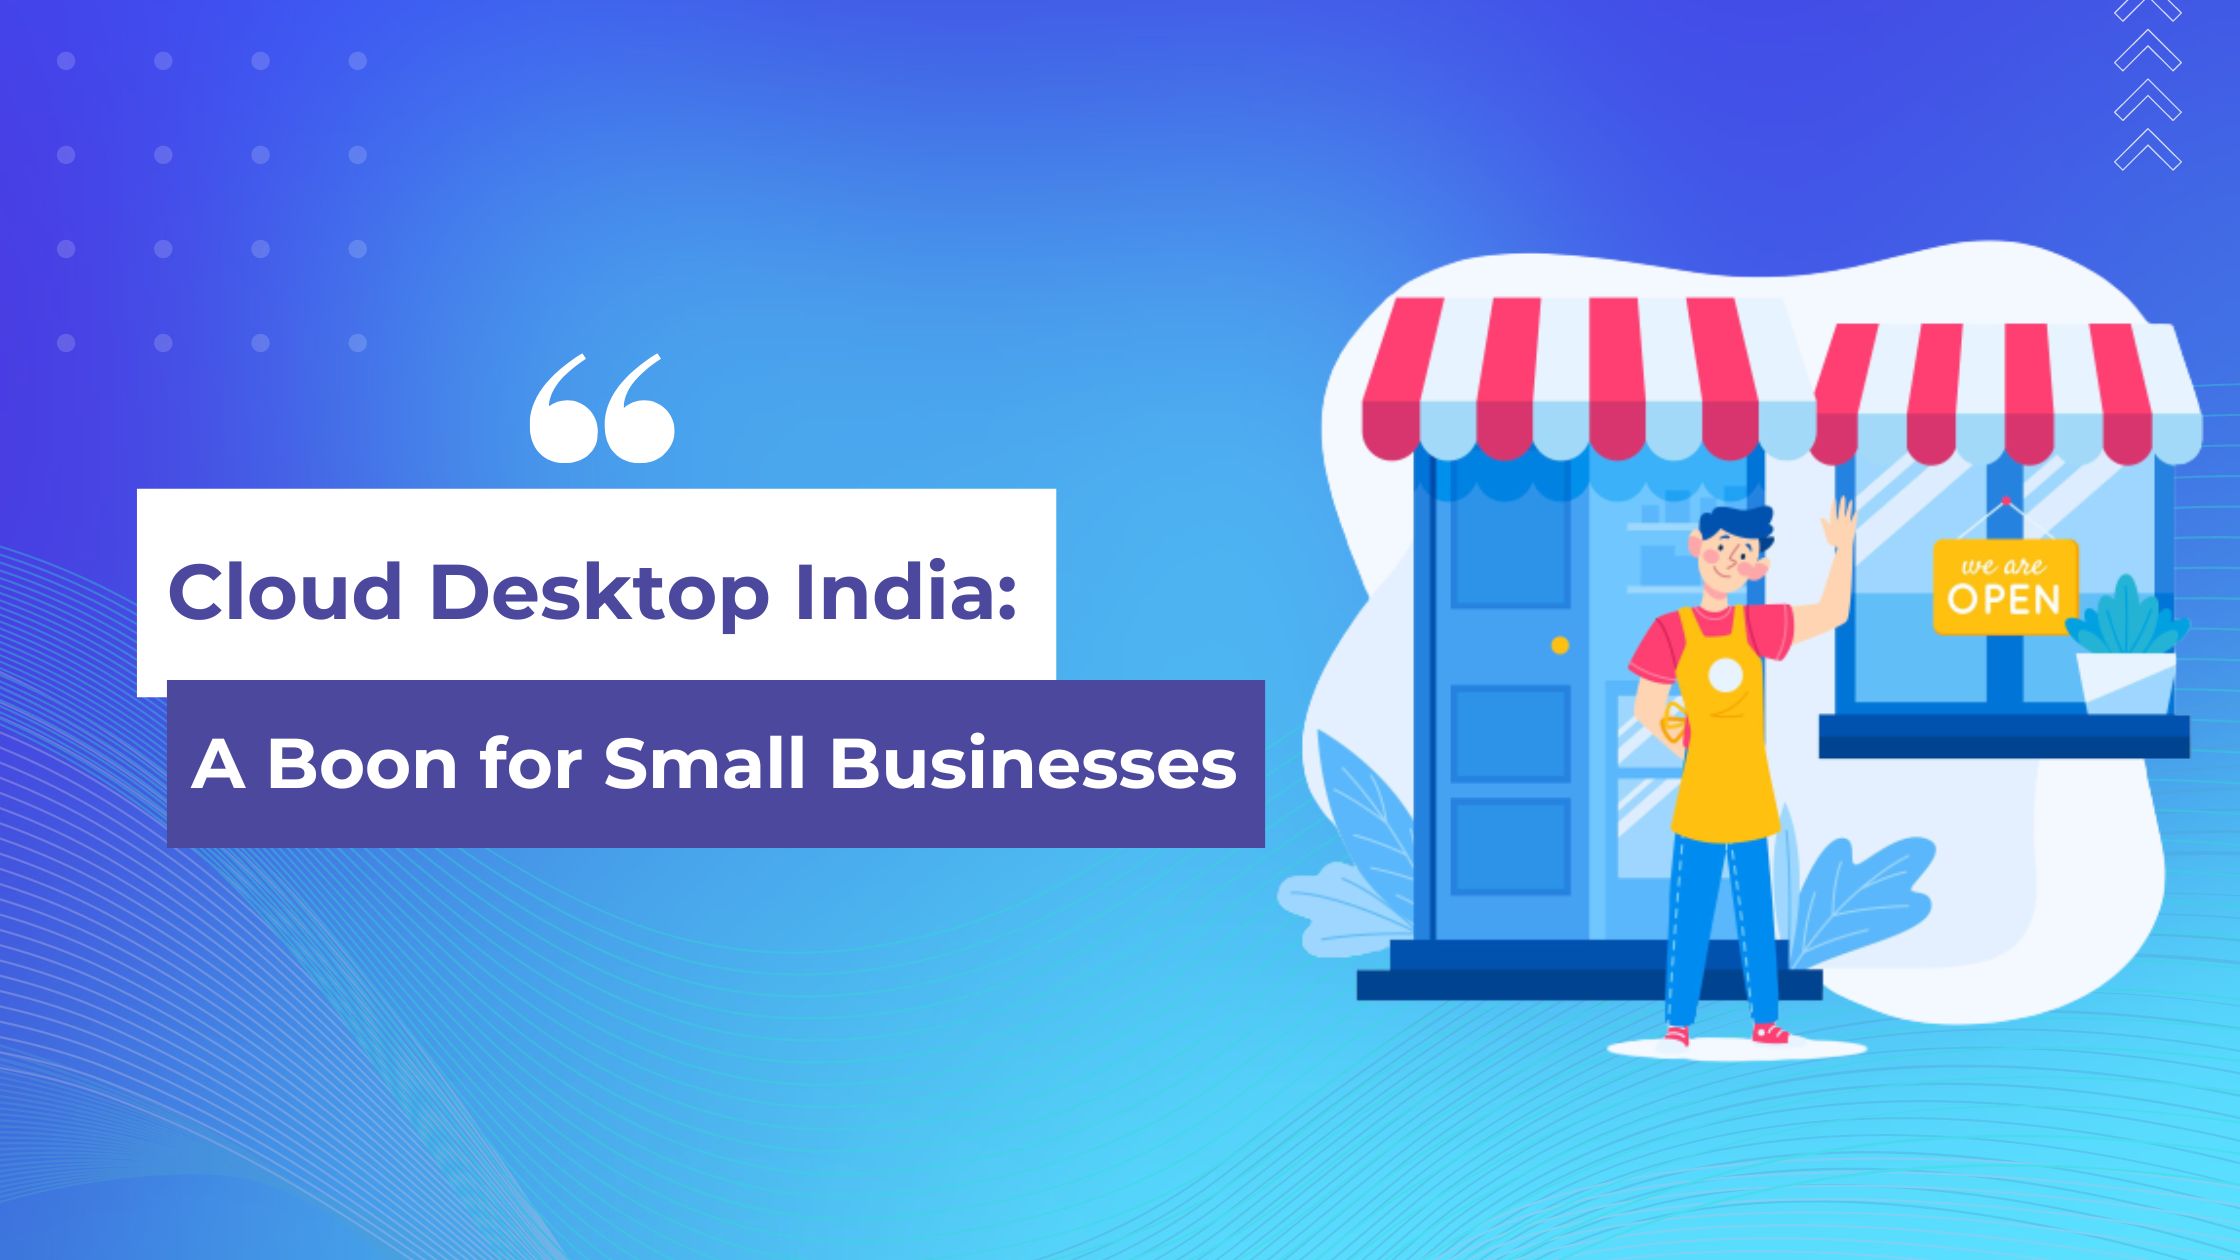 Cloud Desktop India: A Boon for Small Businesses